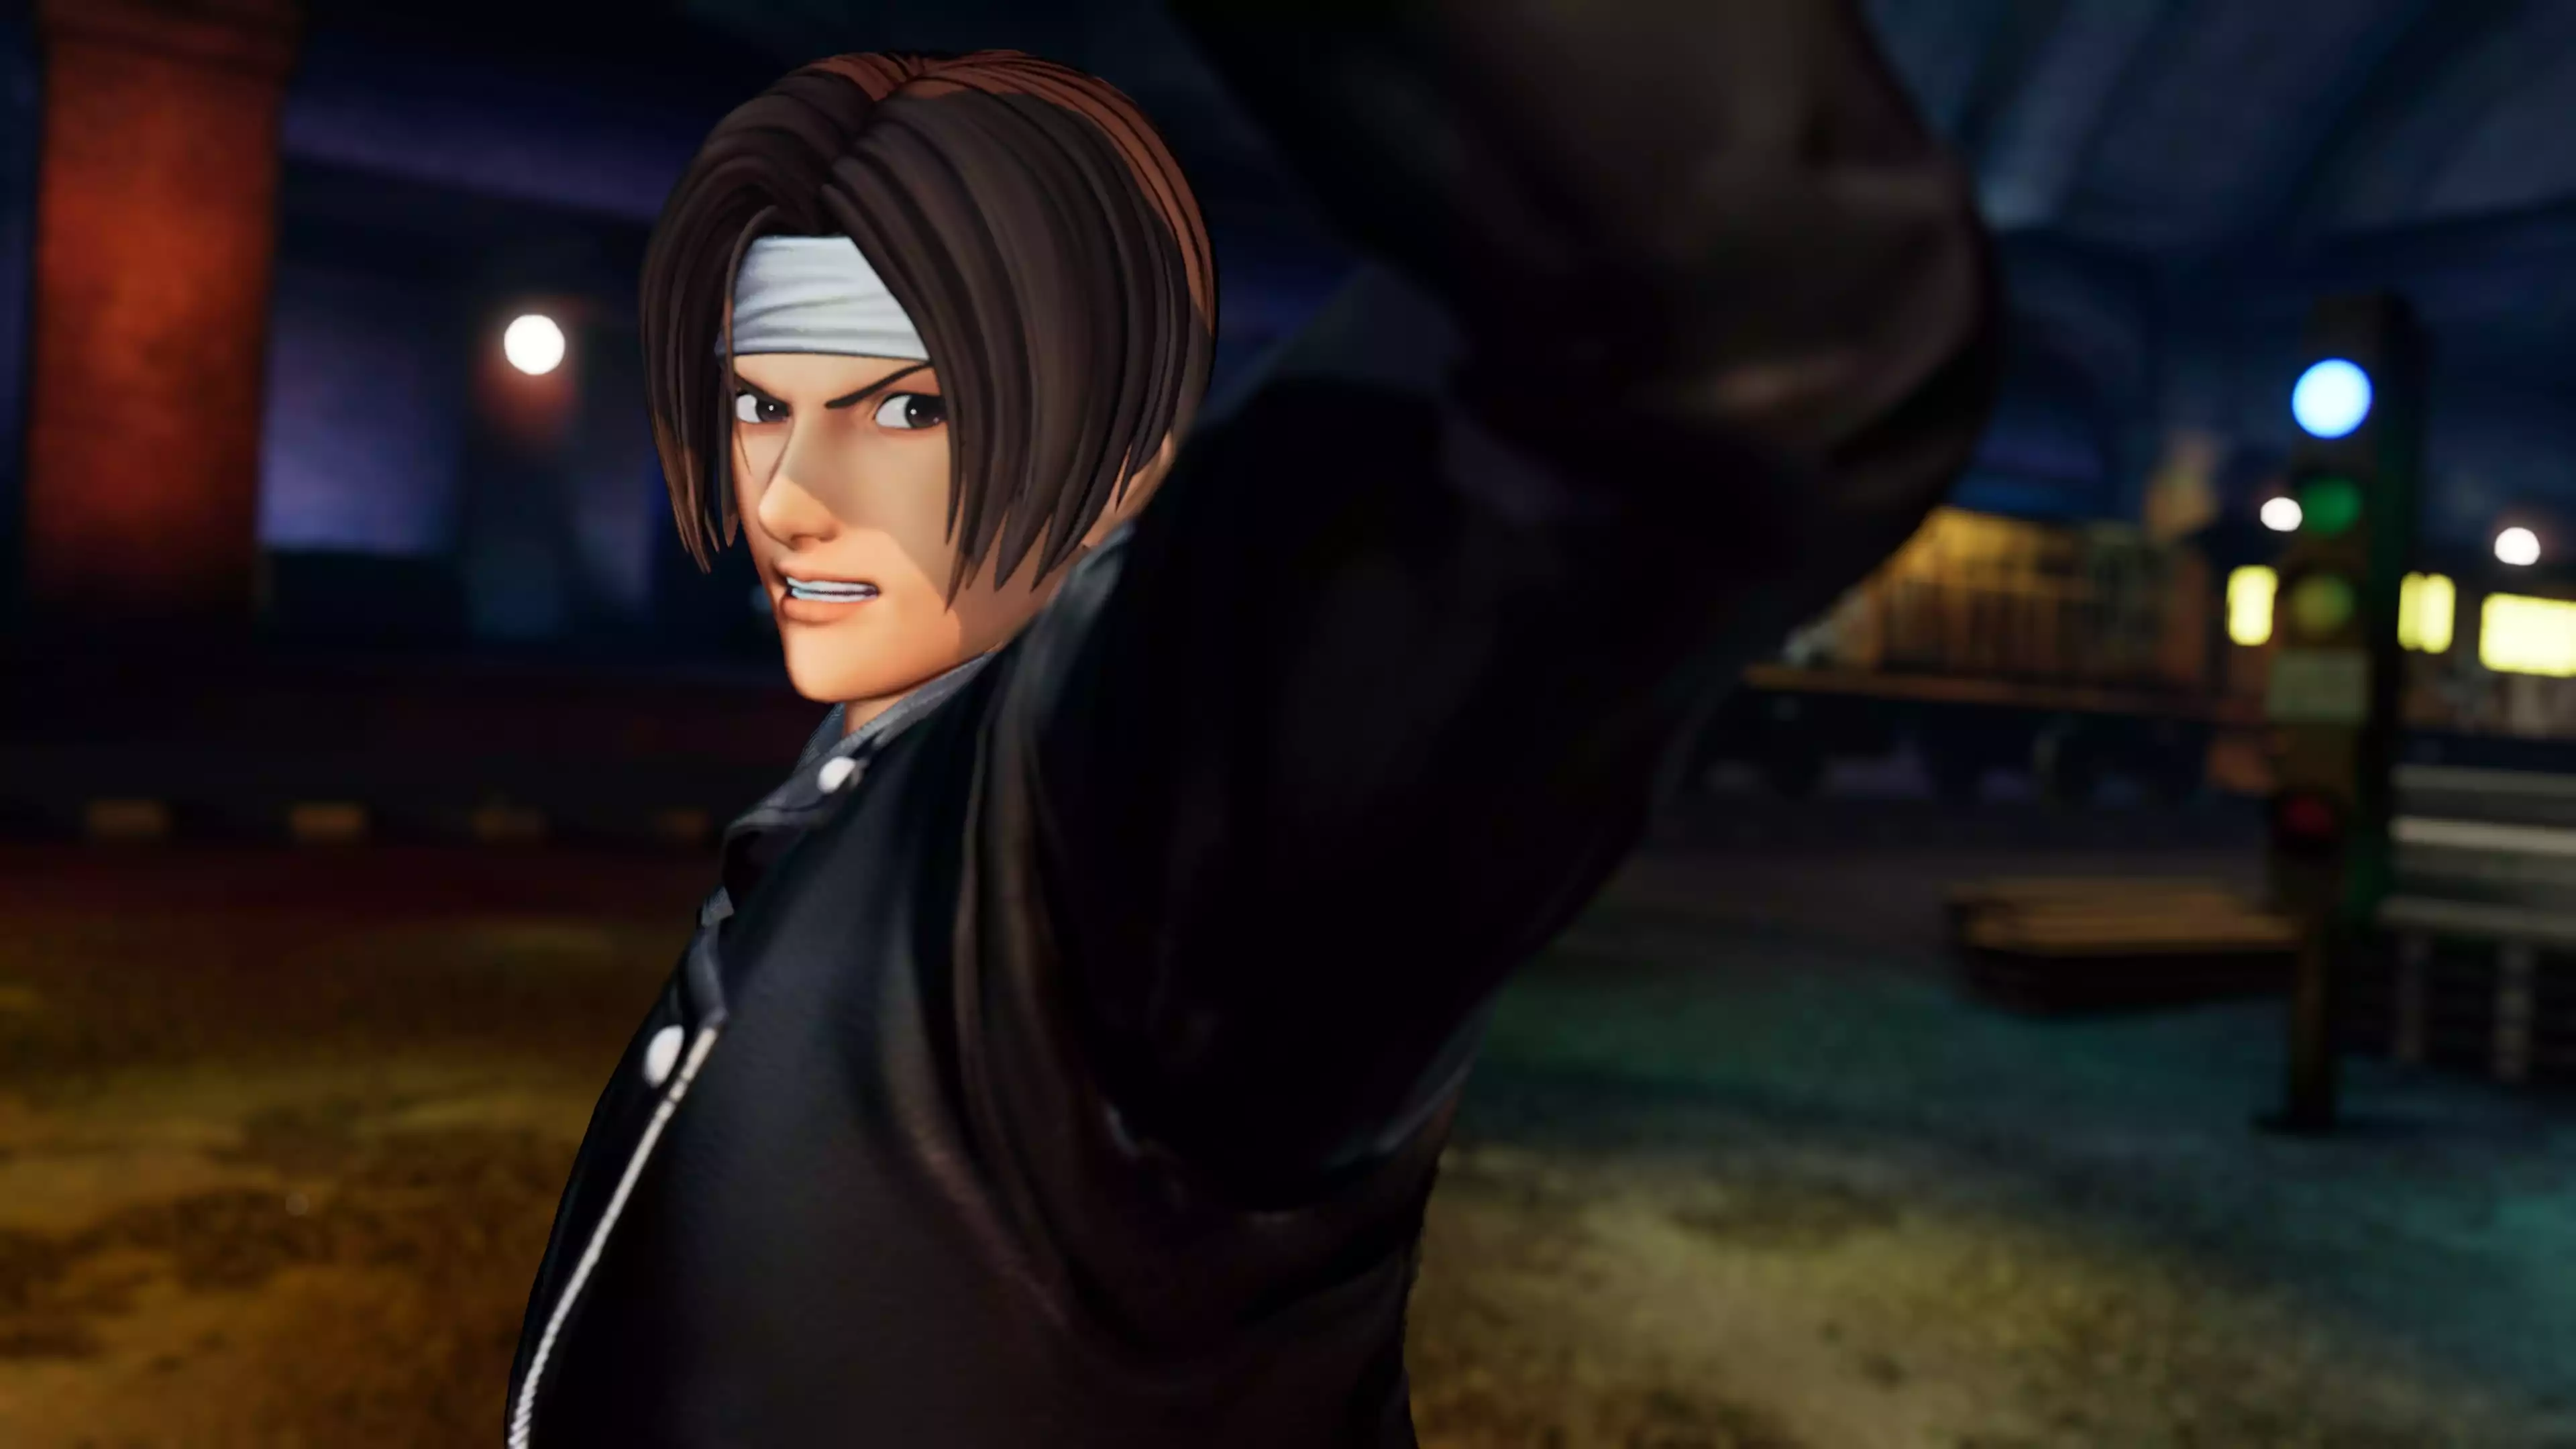 King of Fighters XV Kyo Guide: How To Play Kyo